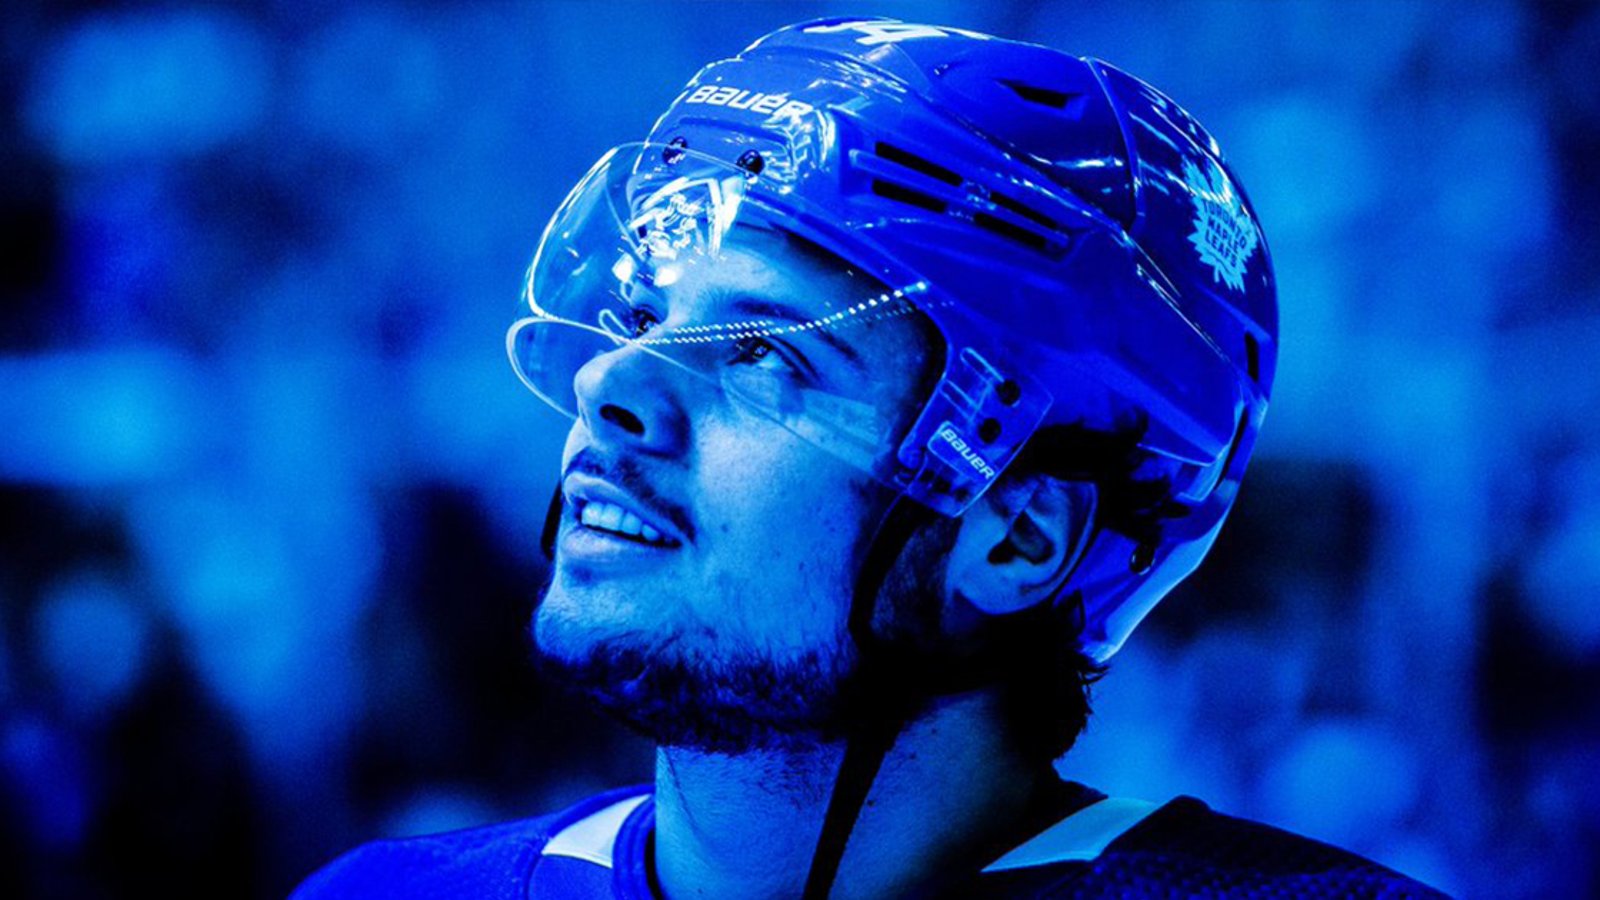 Report: All the details of Auston Matthew’s historic $60 million contract